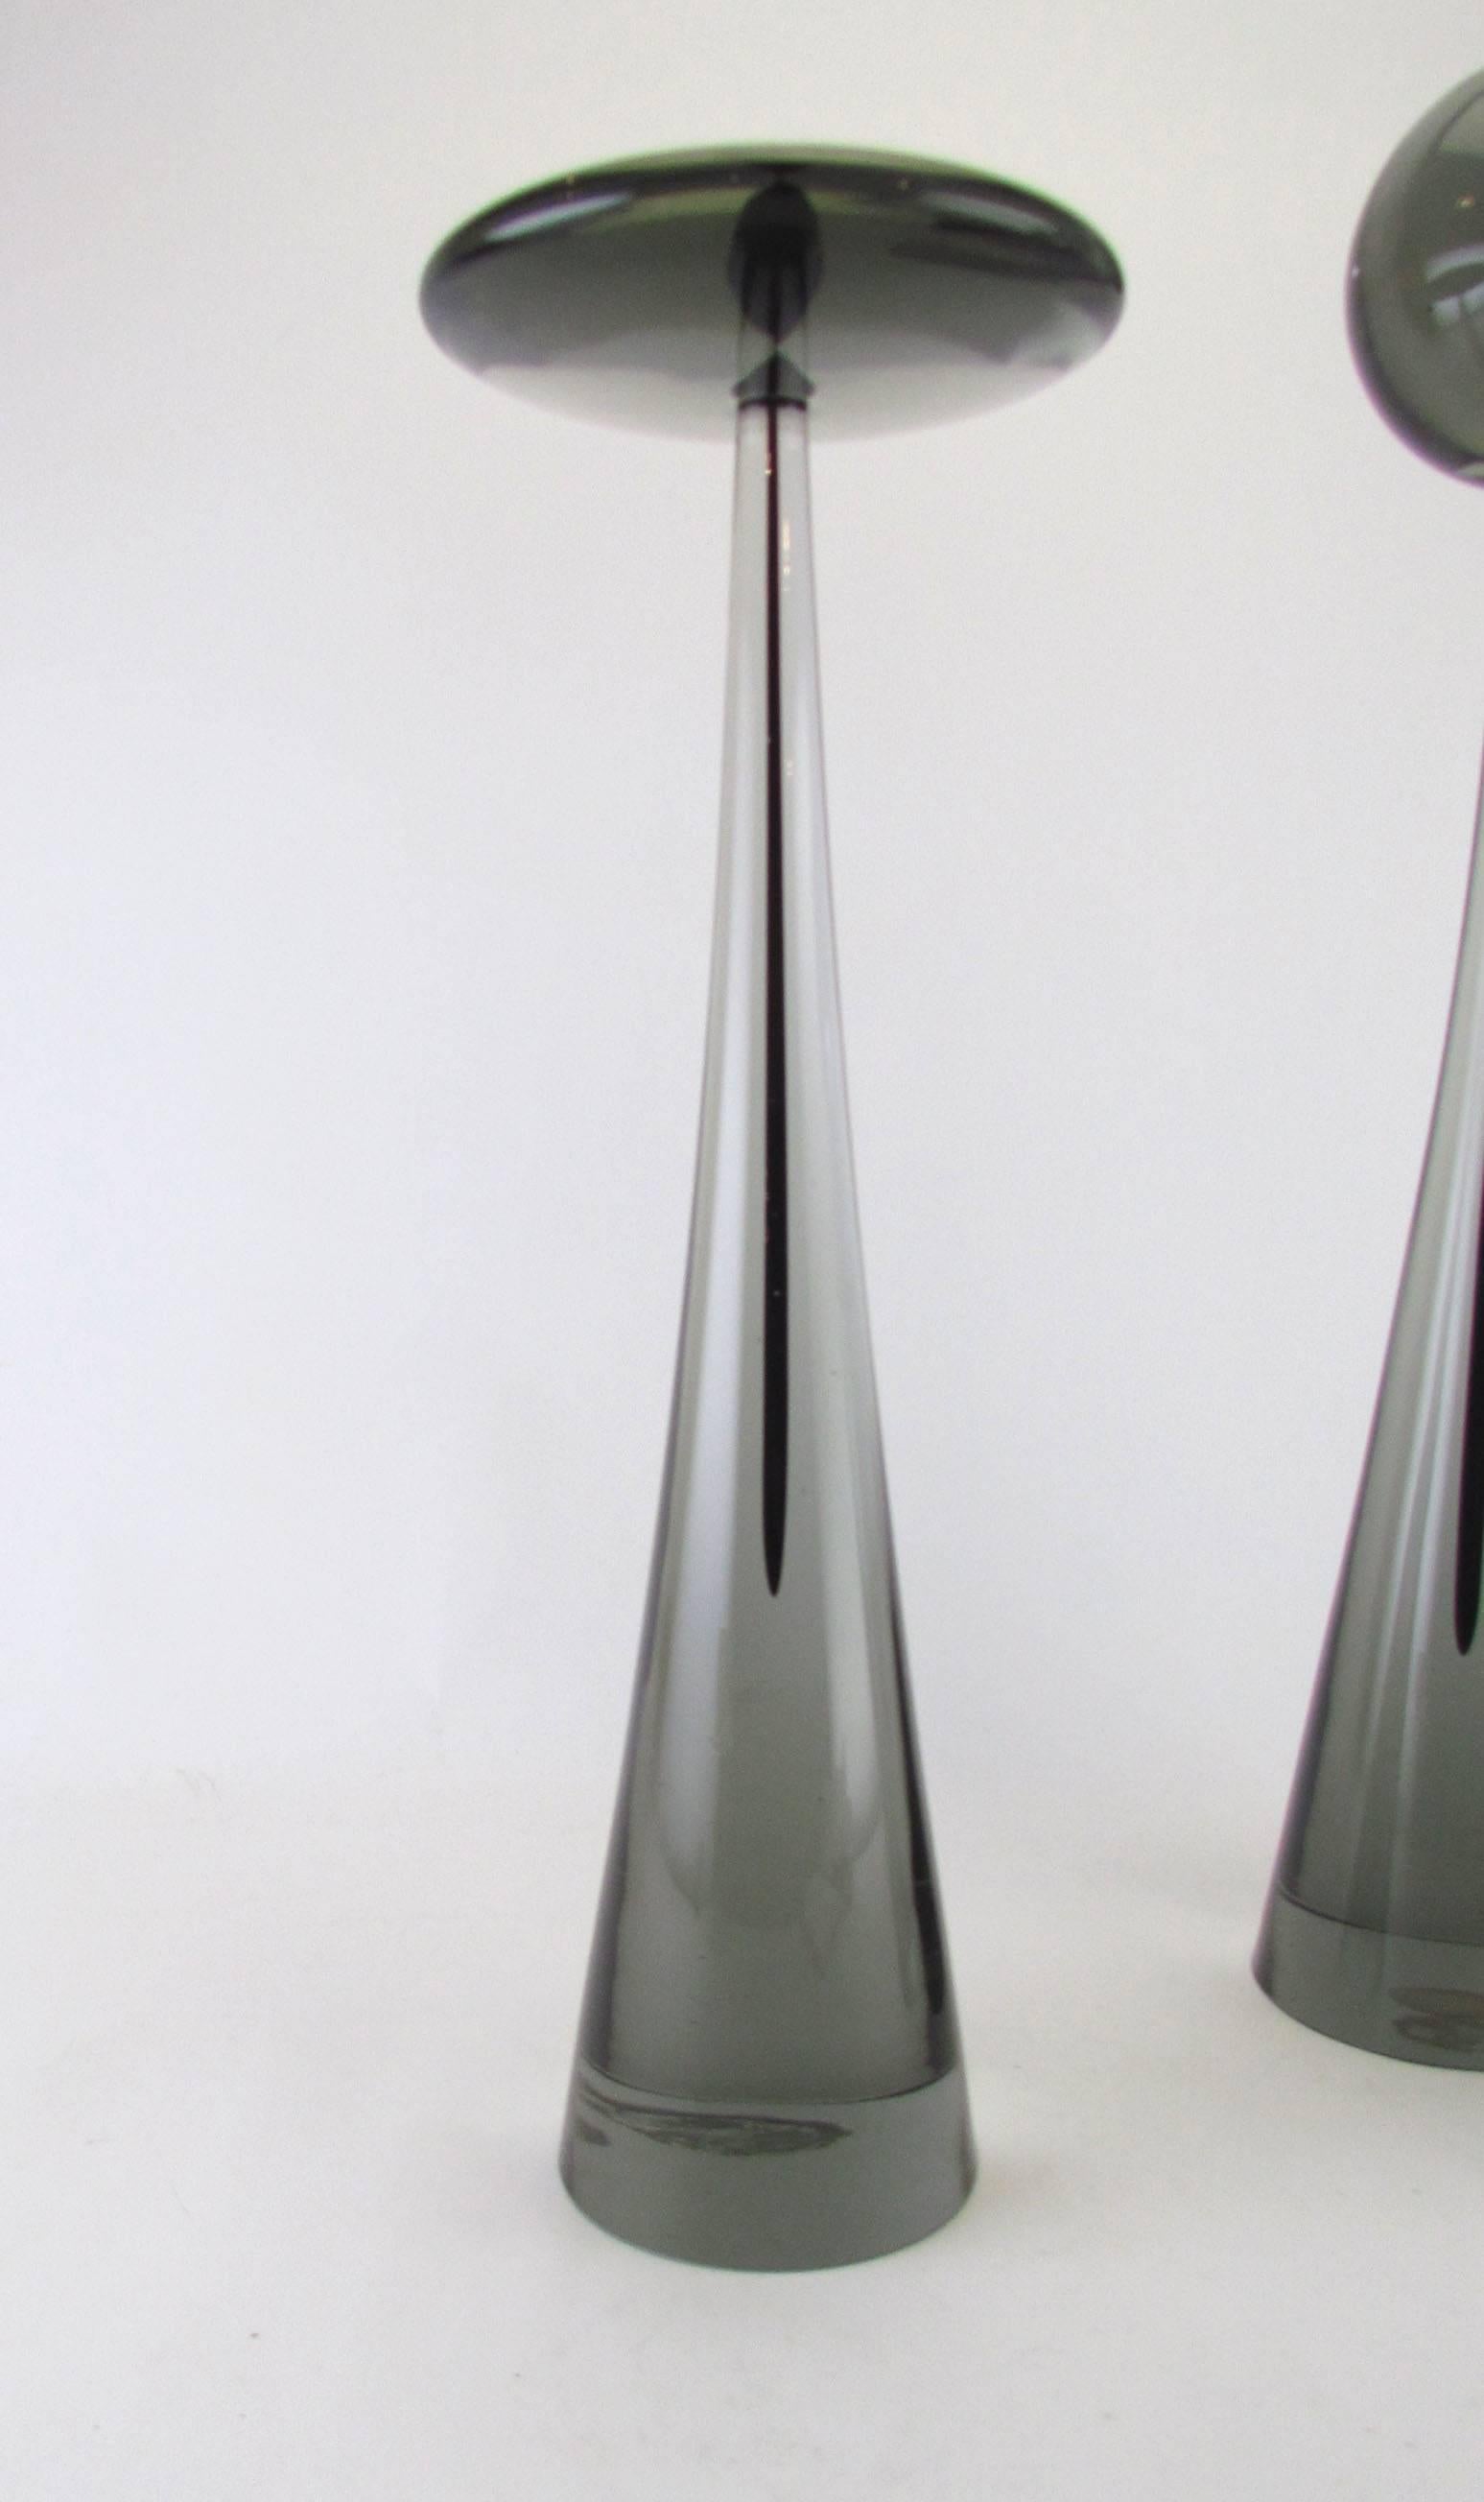 Set of Murano art glass sculptures from the Elementi Lagunari series by Luciano Gaspari for Salviati, Italy, circa late 1950s or early 1960s.

Measures: The tallest one is 17